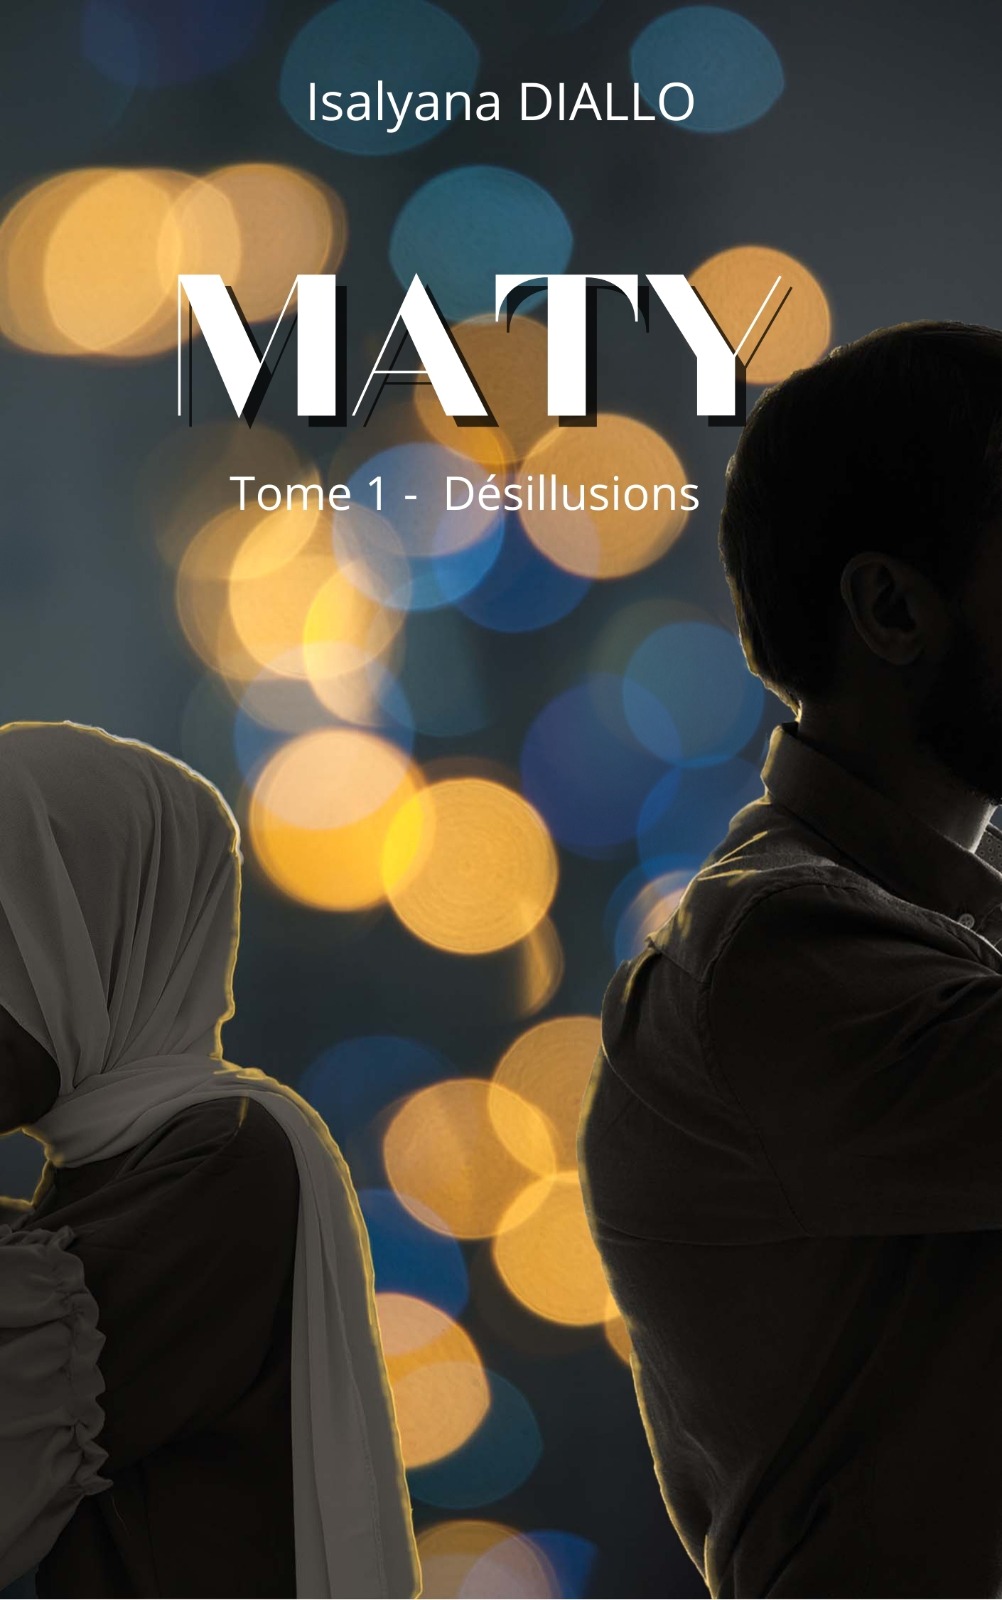 Maty - Tome 1 - Désillusions